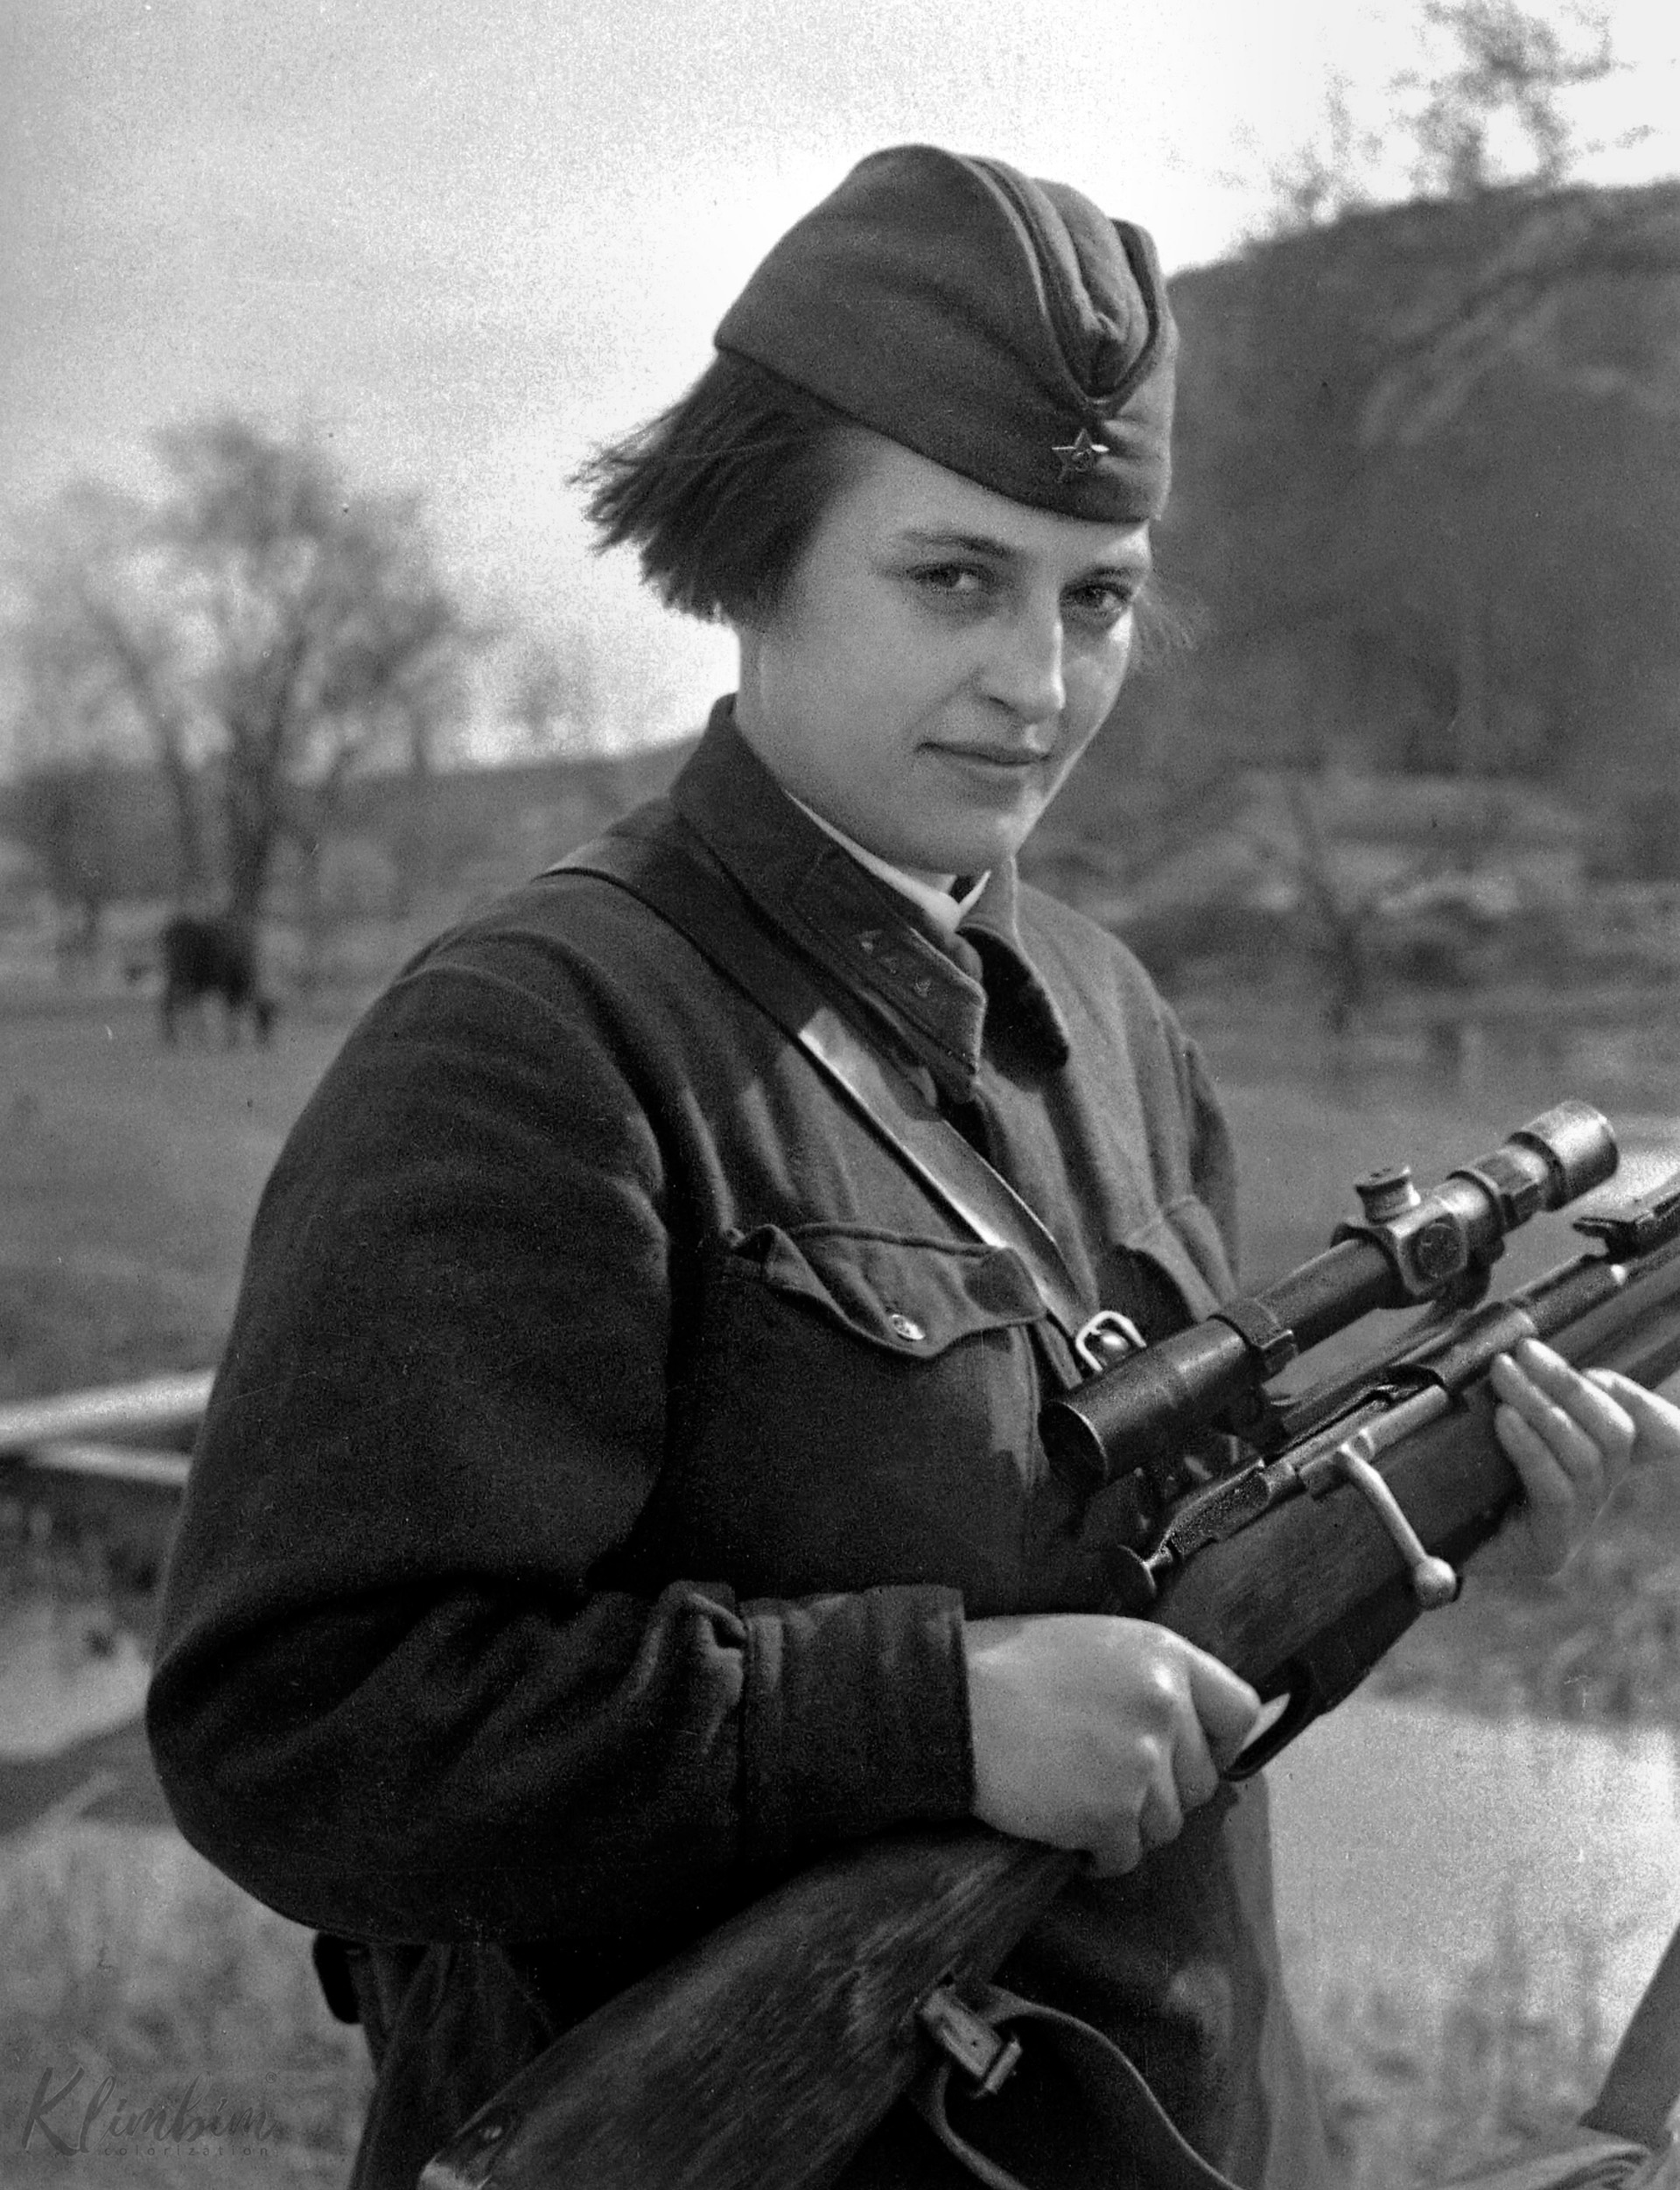 One of the top snipers of World War II, Lyudmila Pavlichenko had 309 confirmed kills, including 36 enemy snipers.